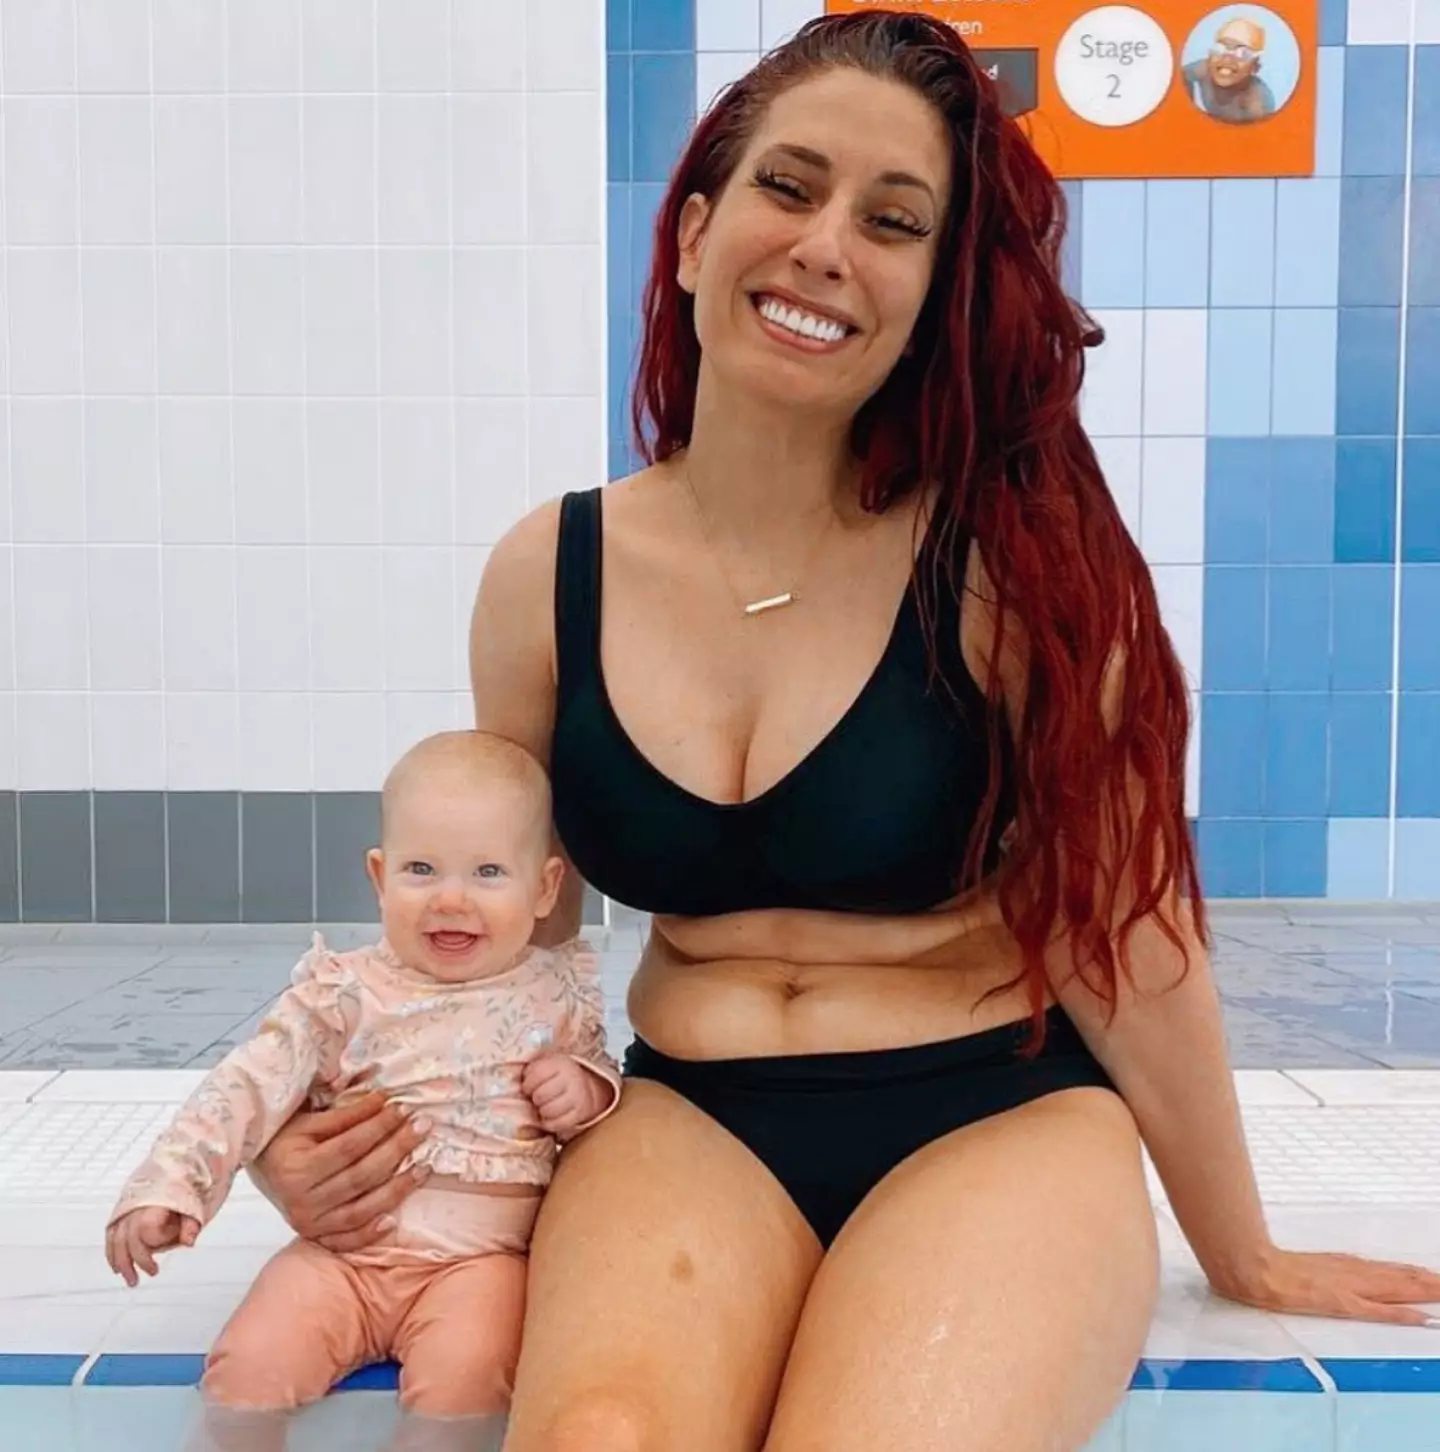 Stacey and Rose went to the swimming pool together for the first time (